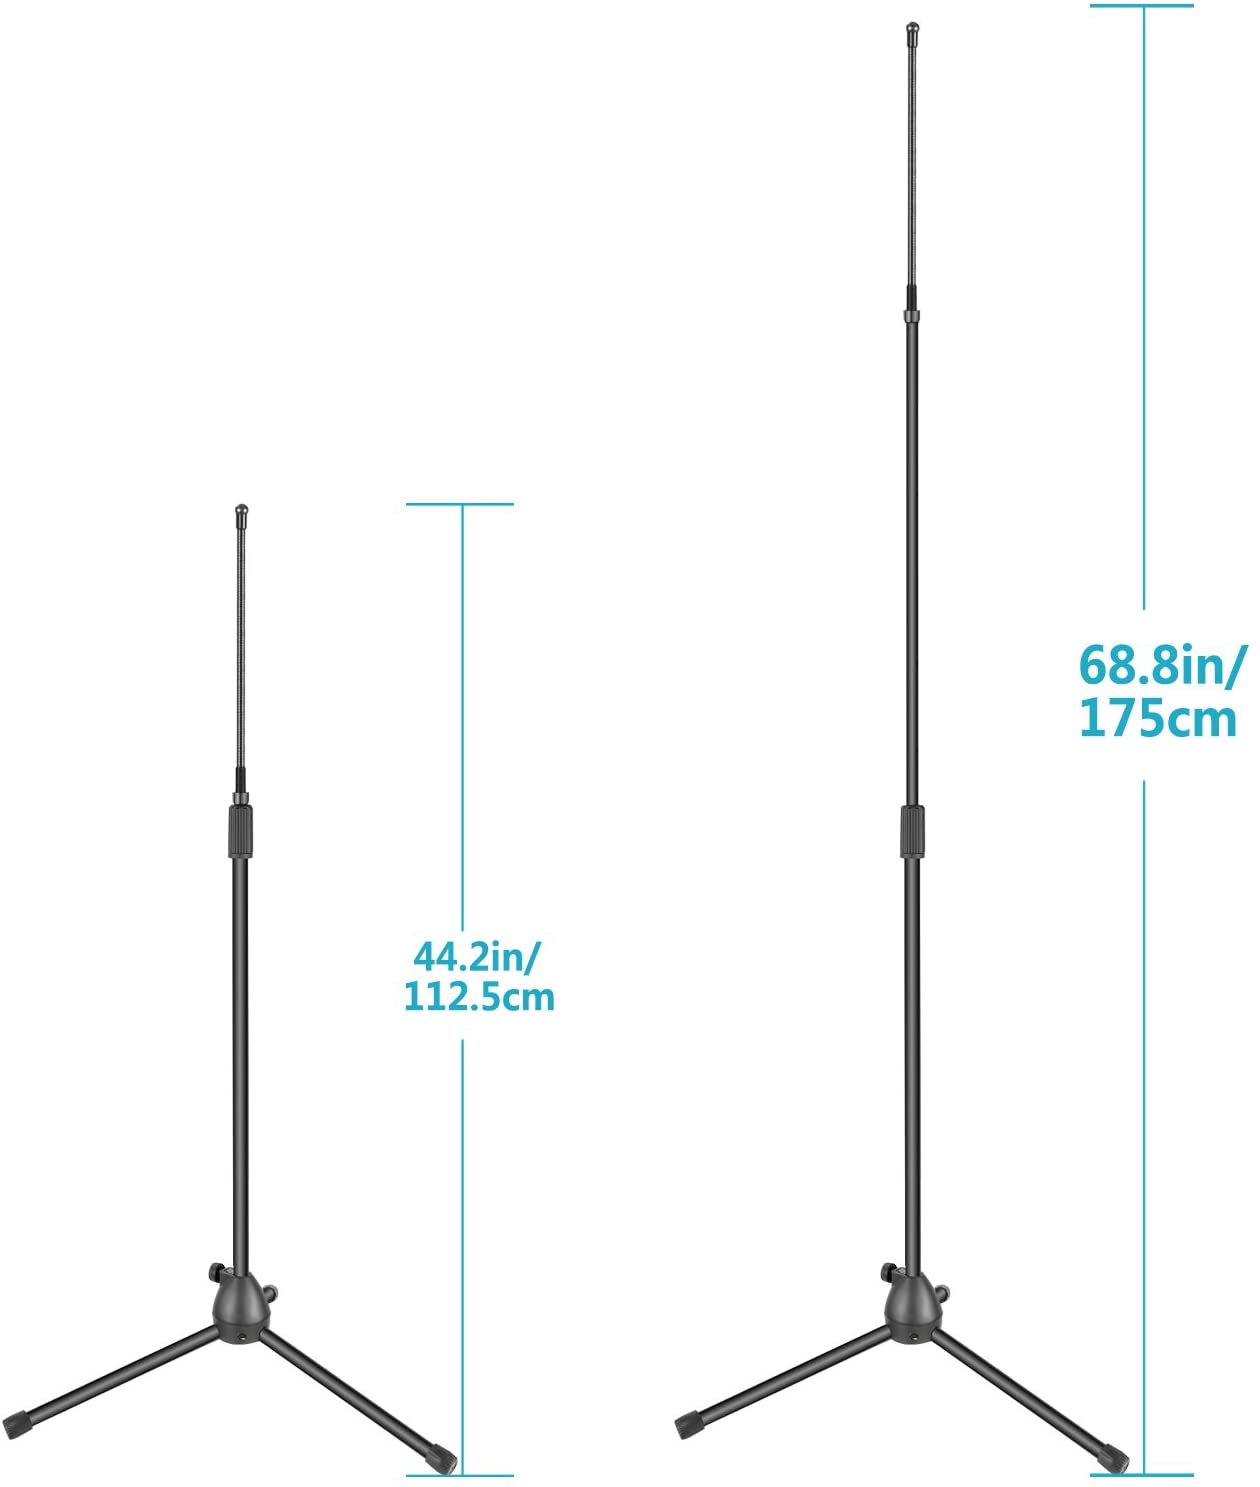 The Mohrim Adjustable Floor Stand Tripod Stand